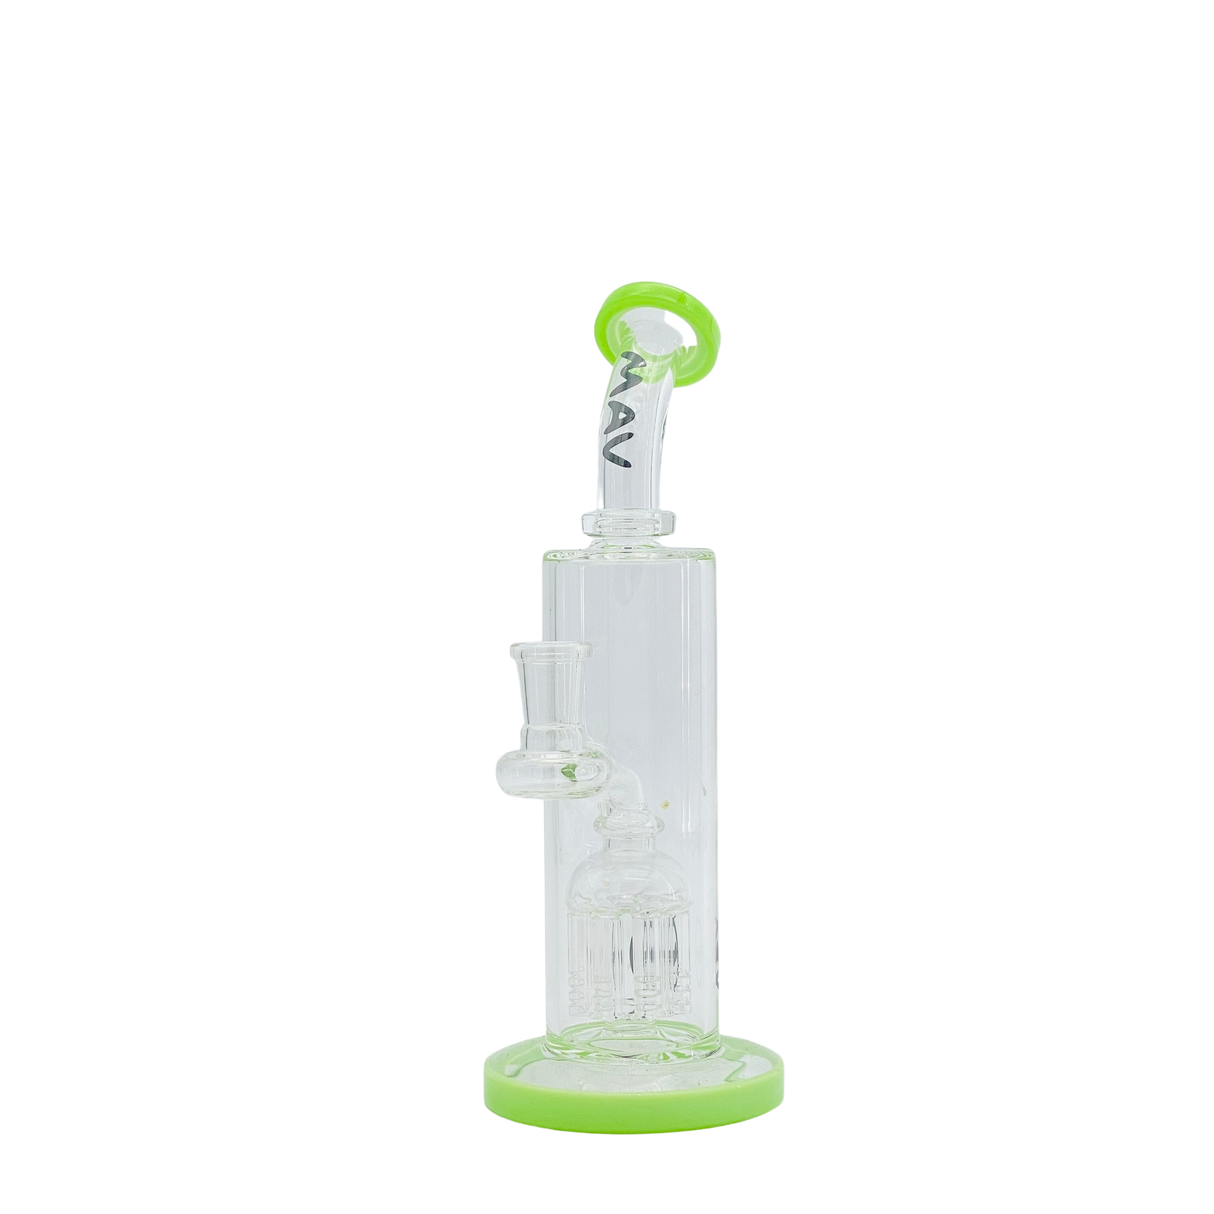 MAV Glass Bent Neck 8-arm Tree Bay Rig in Slime variant, front view with clear glass and green accents